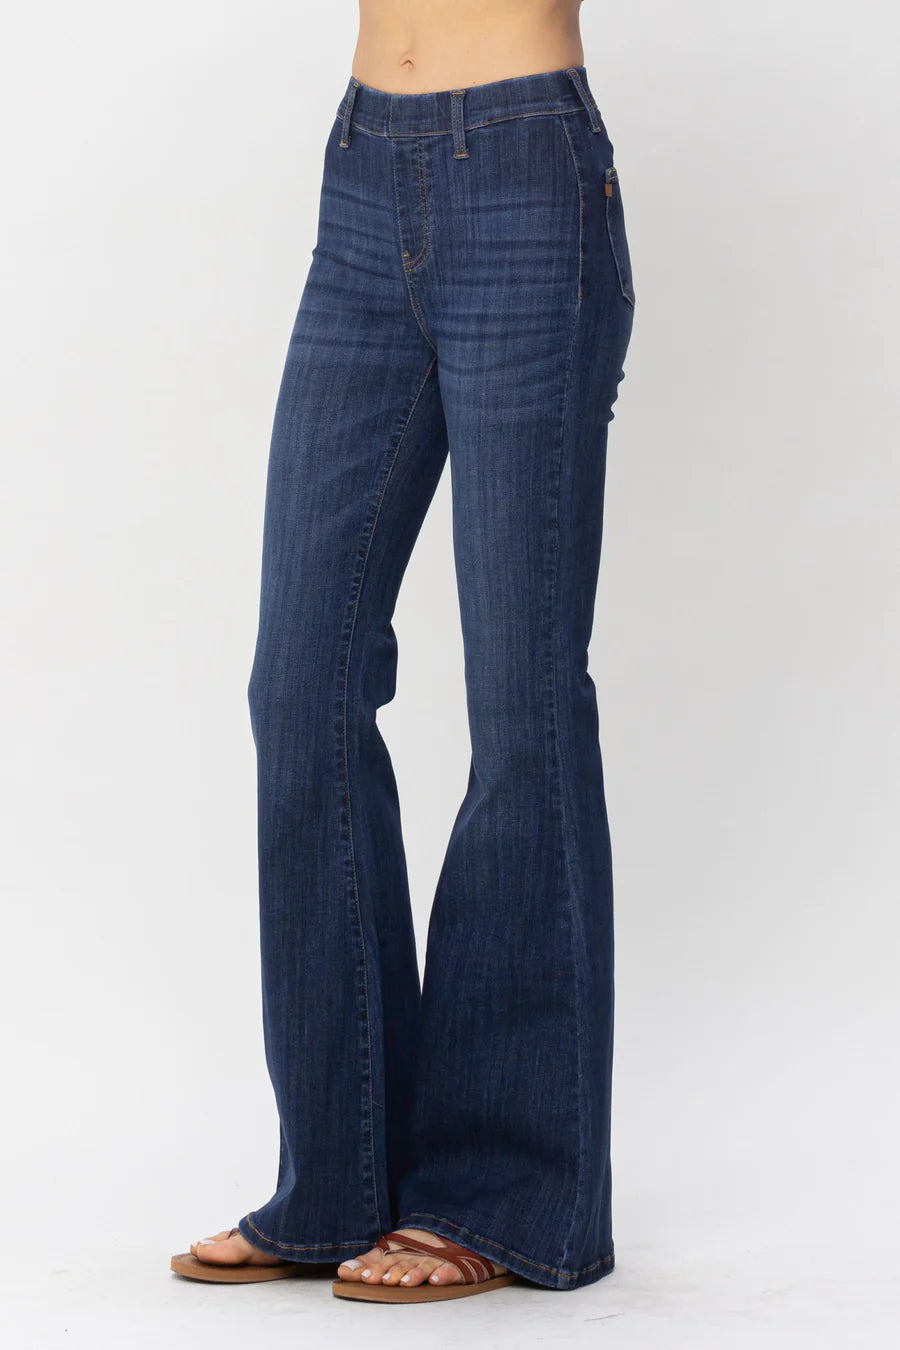 Judy Blue Pull On Flare Jean- 88276